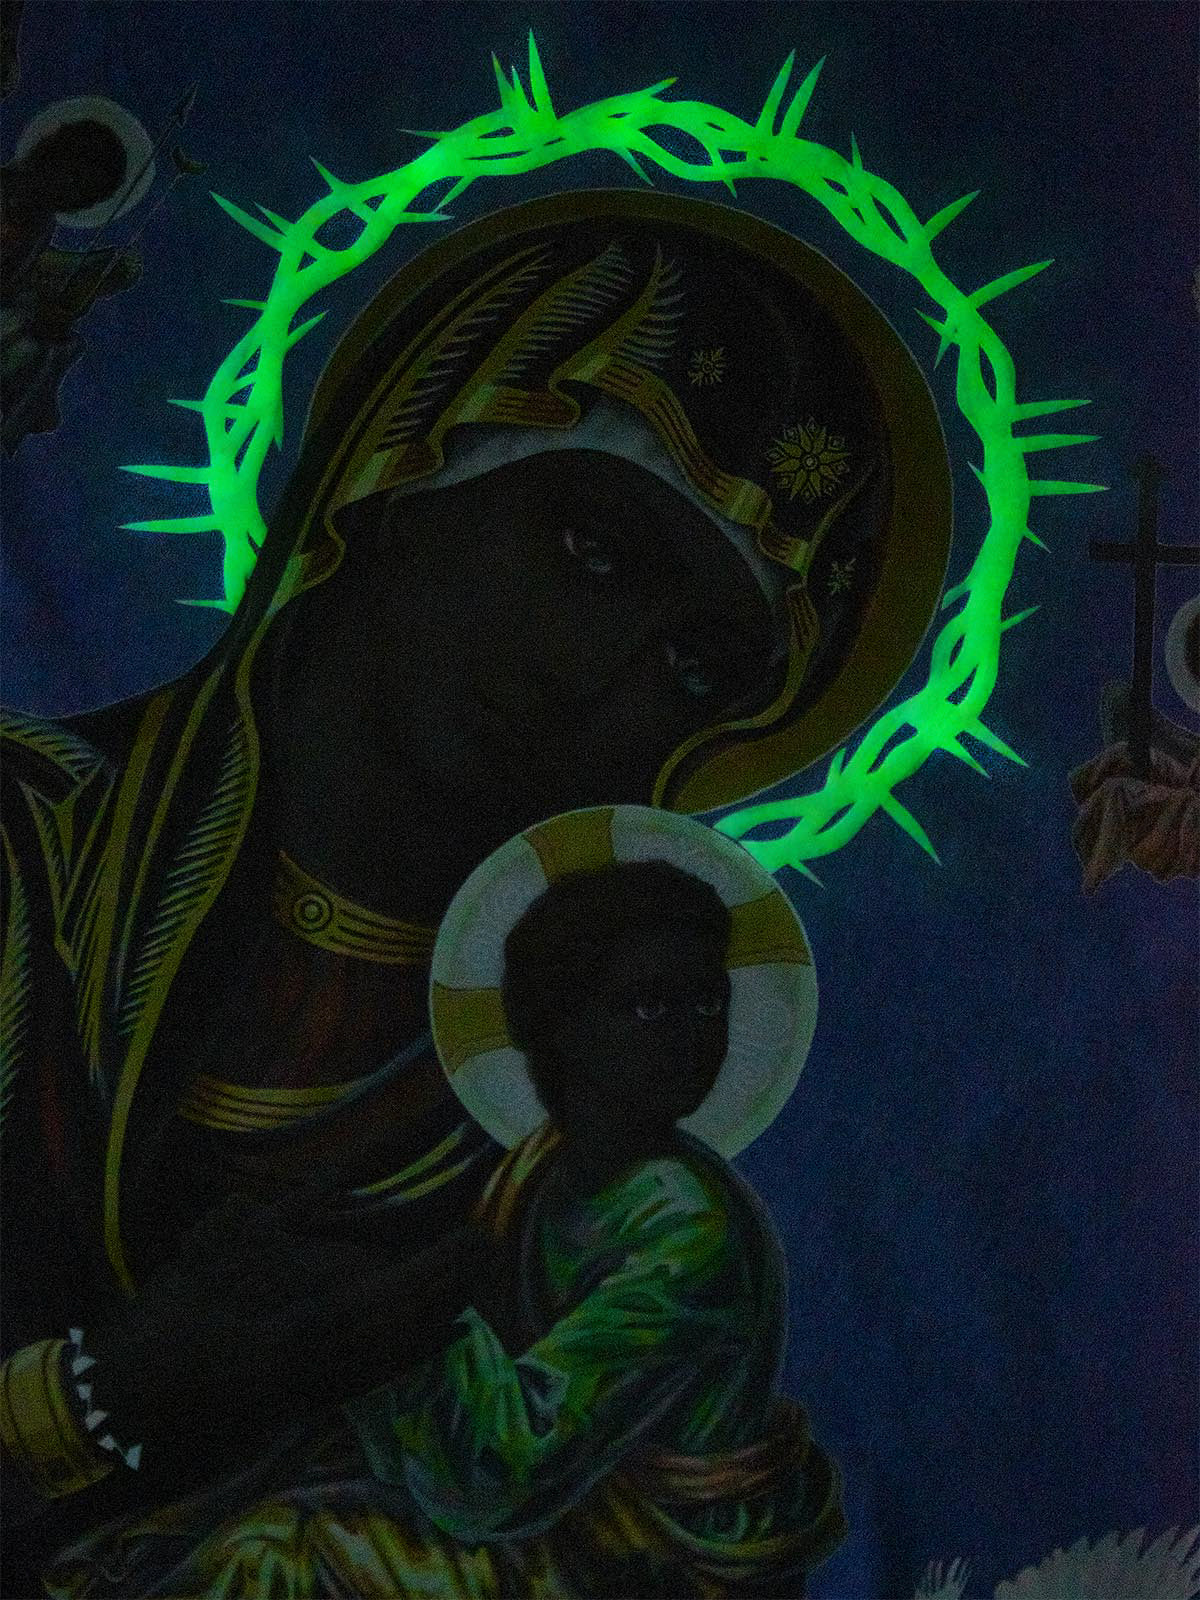 OBSTACLES & DANGERS© Glow in the dark Black Madonna and Child T-shirt